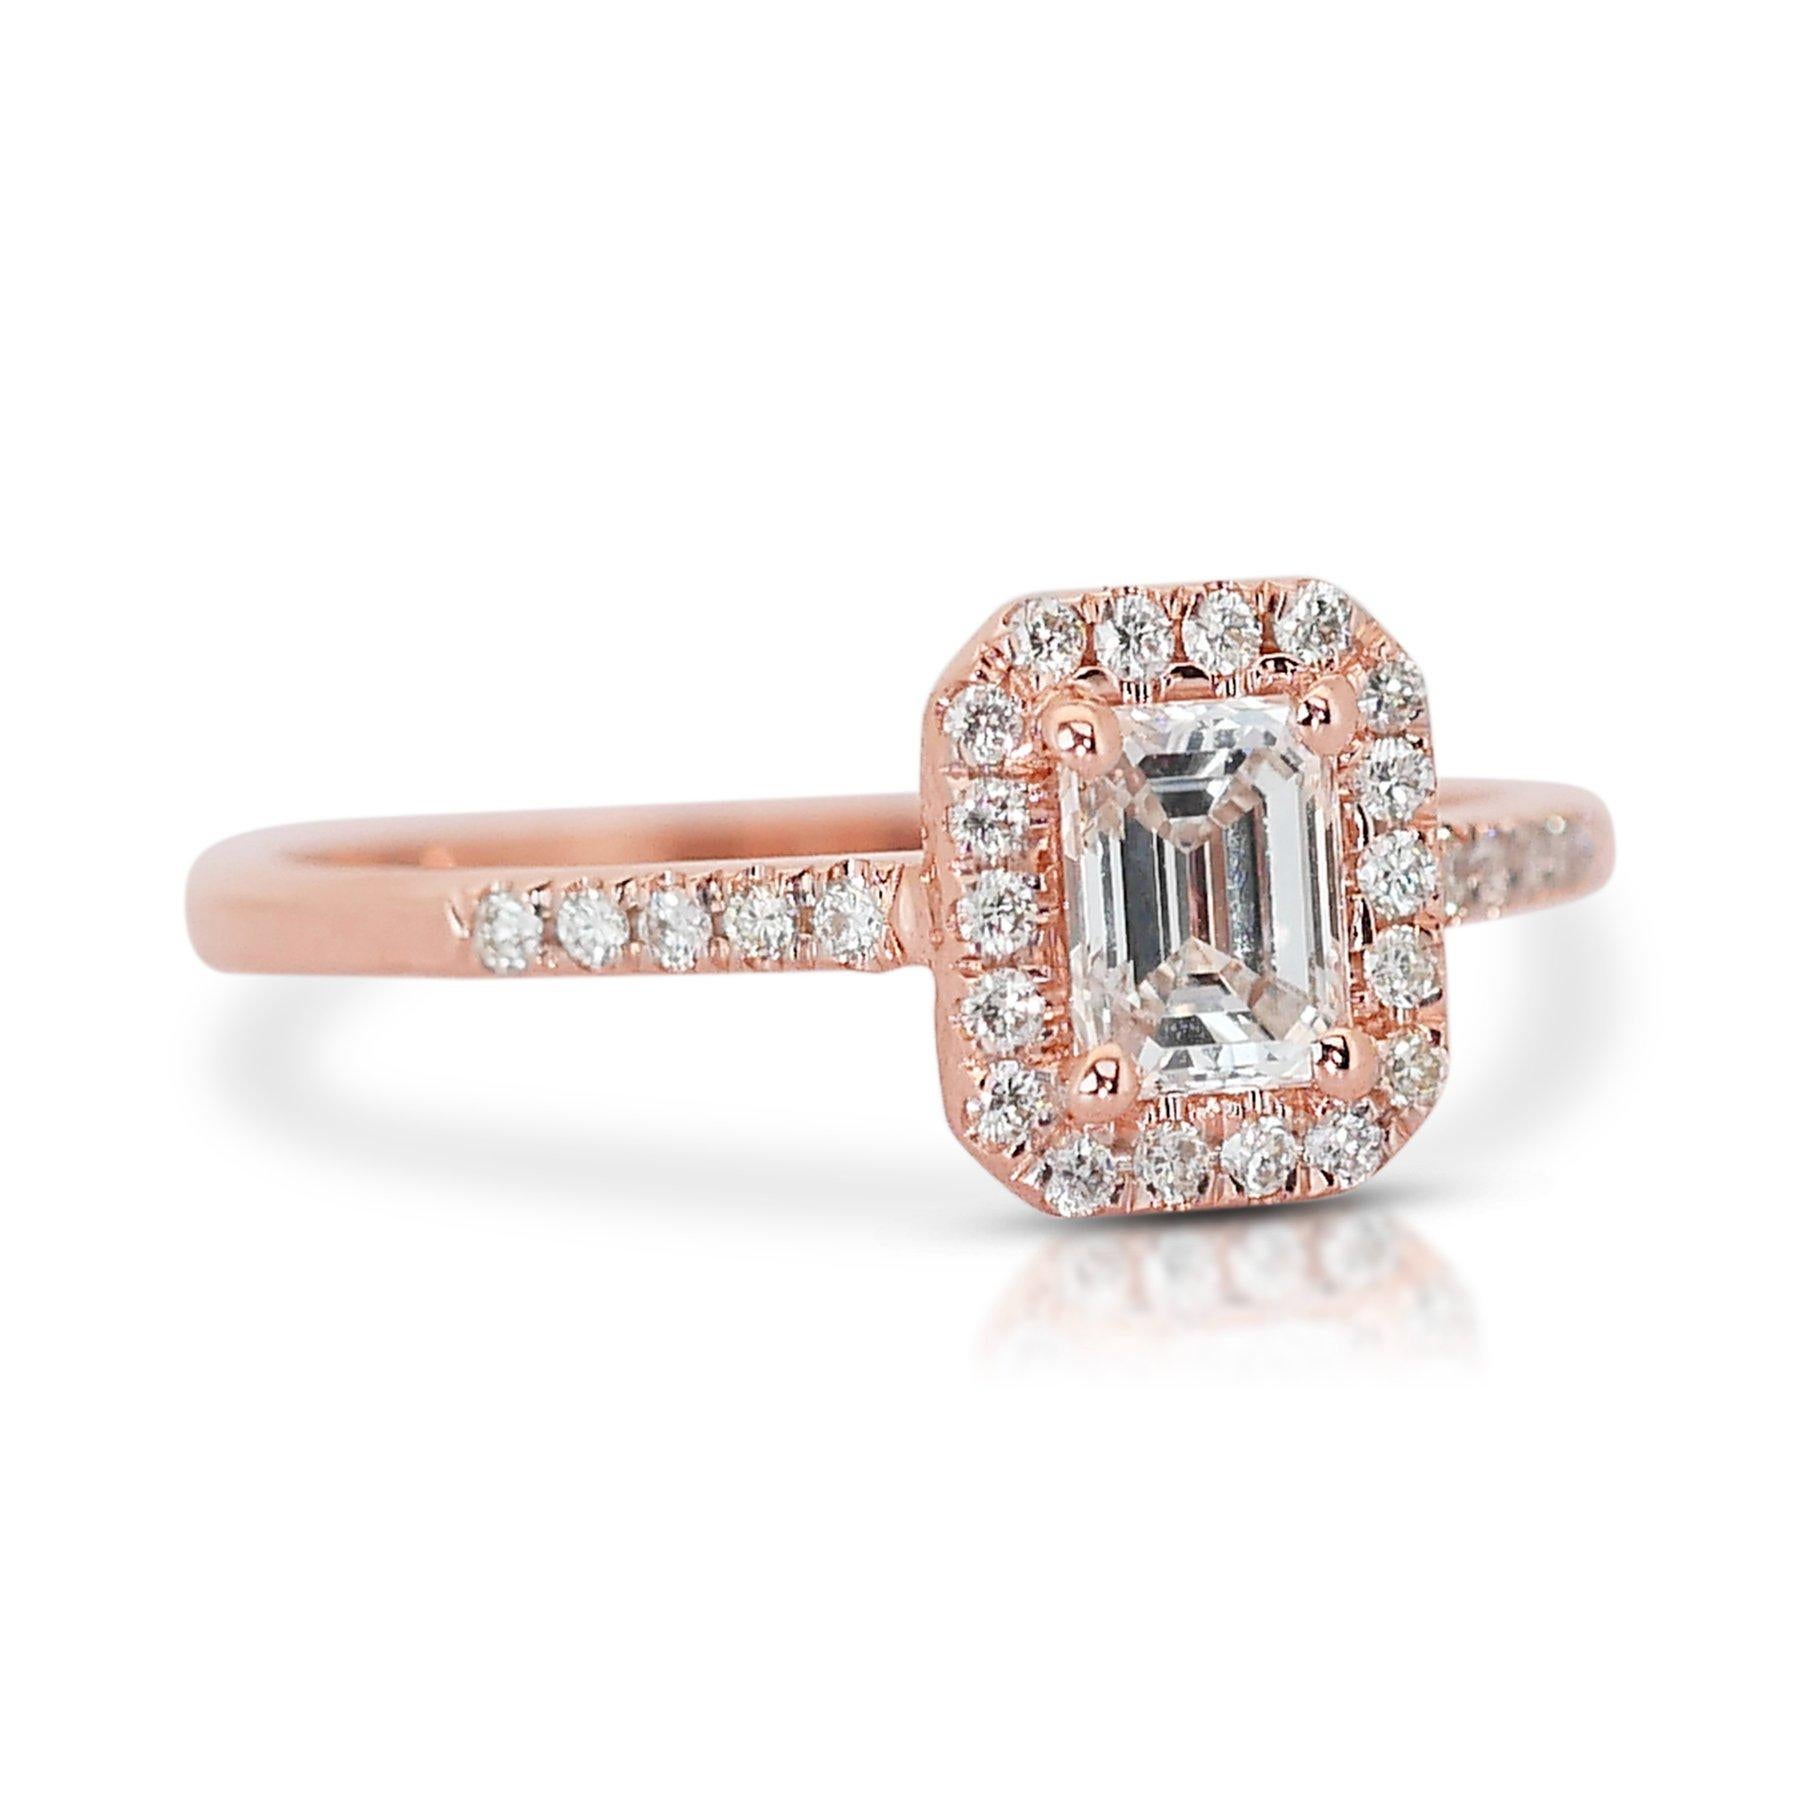 Emerald Cut Captivating 0.90ct Diamonds Halo Ring in 18k Rose Gold - GIA Certified  For Sale